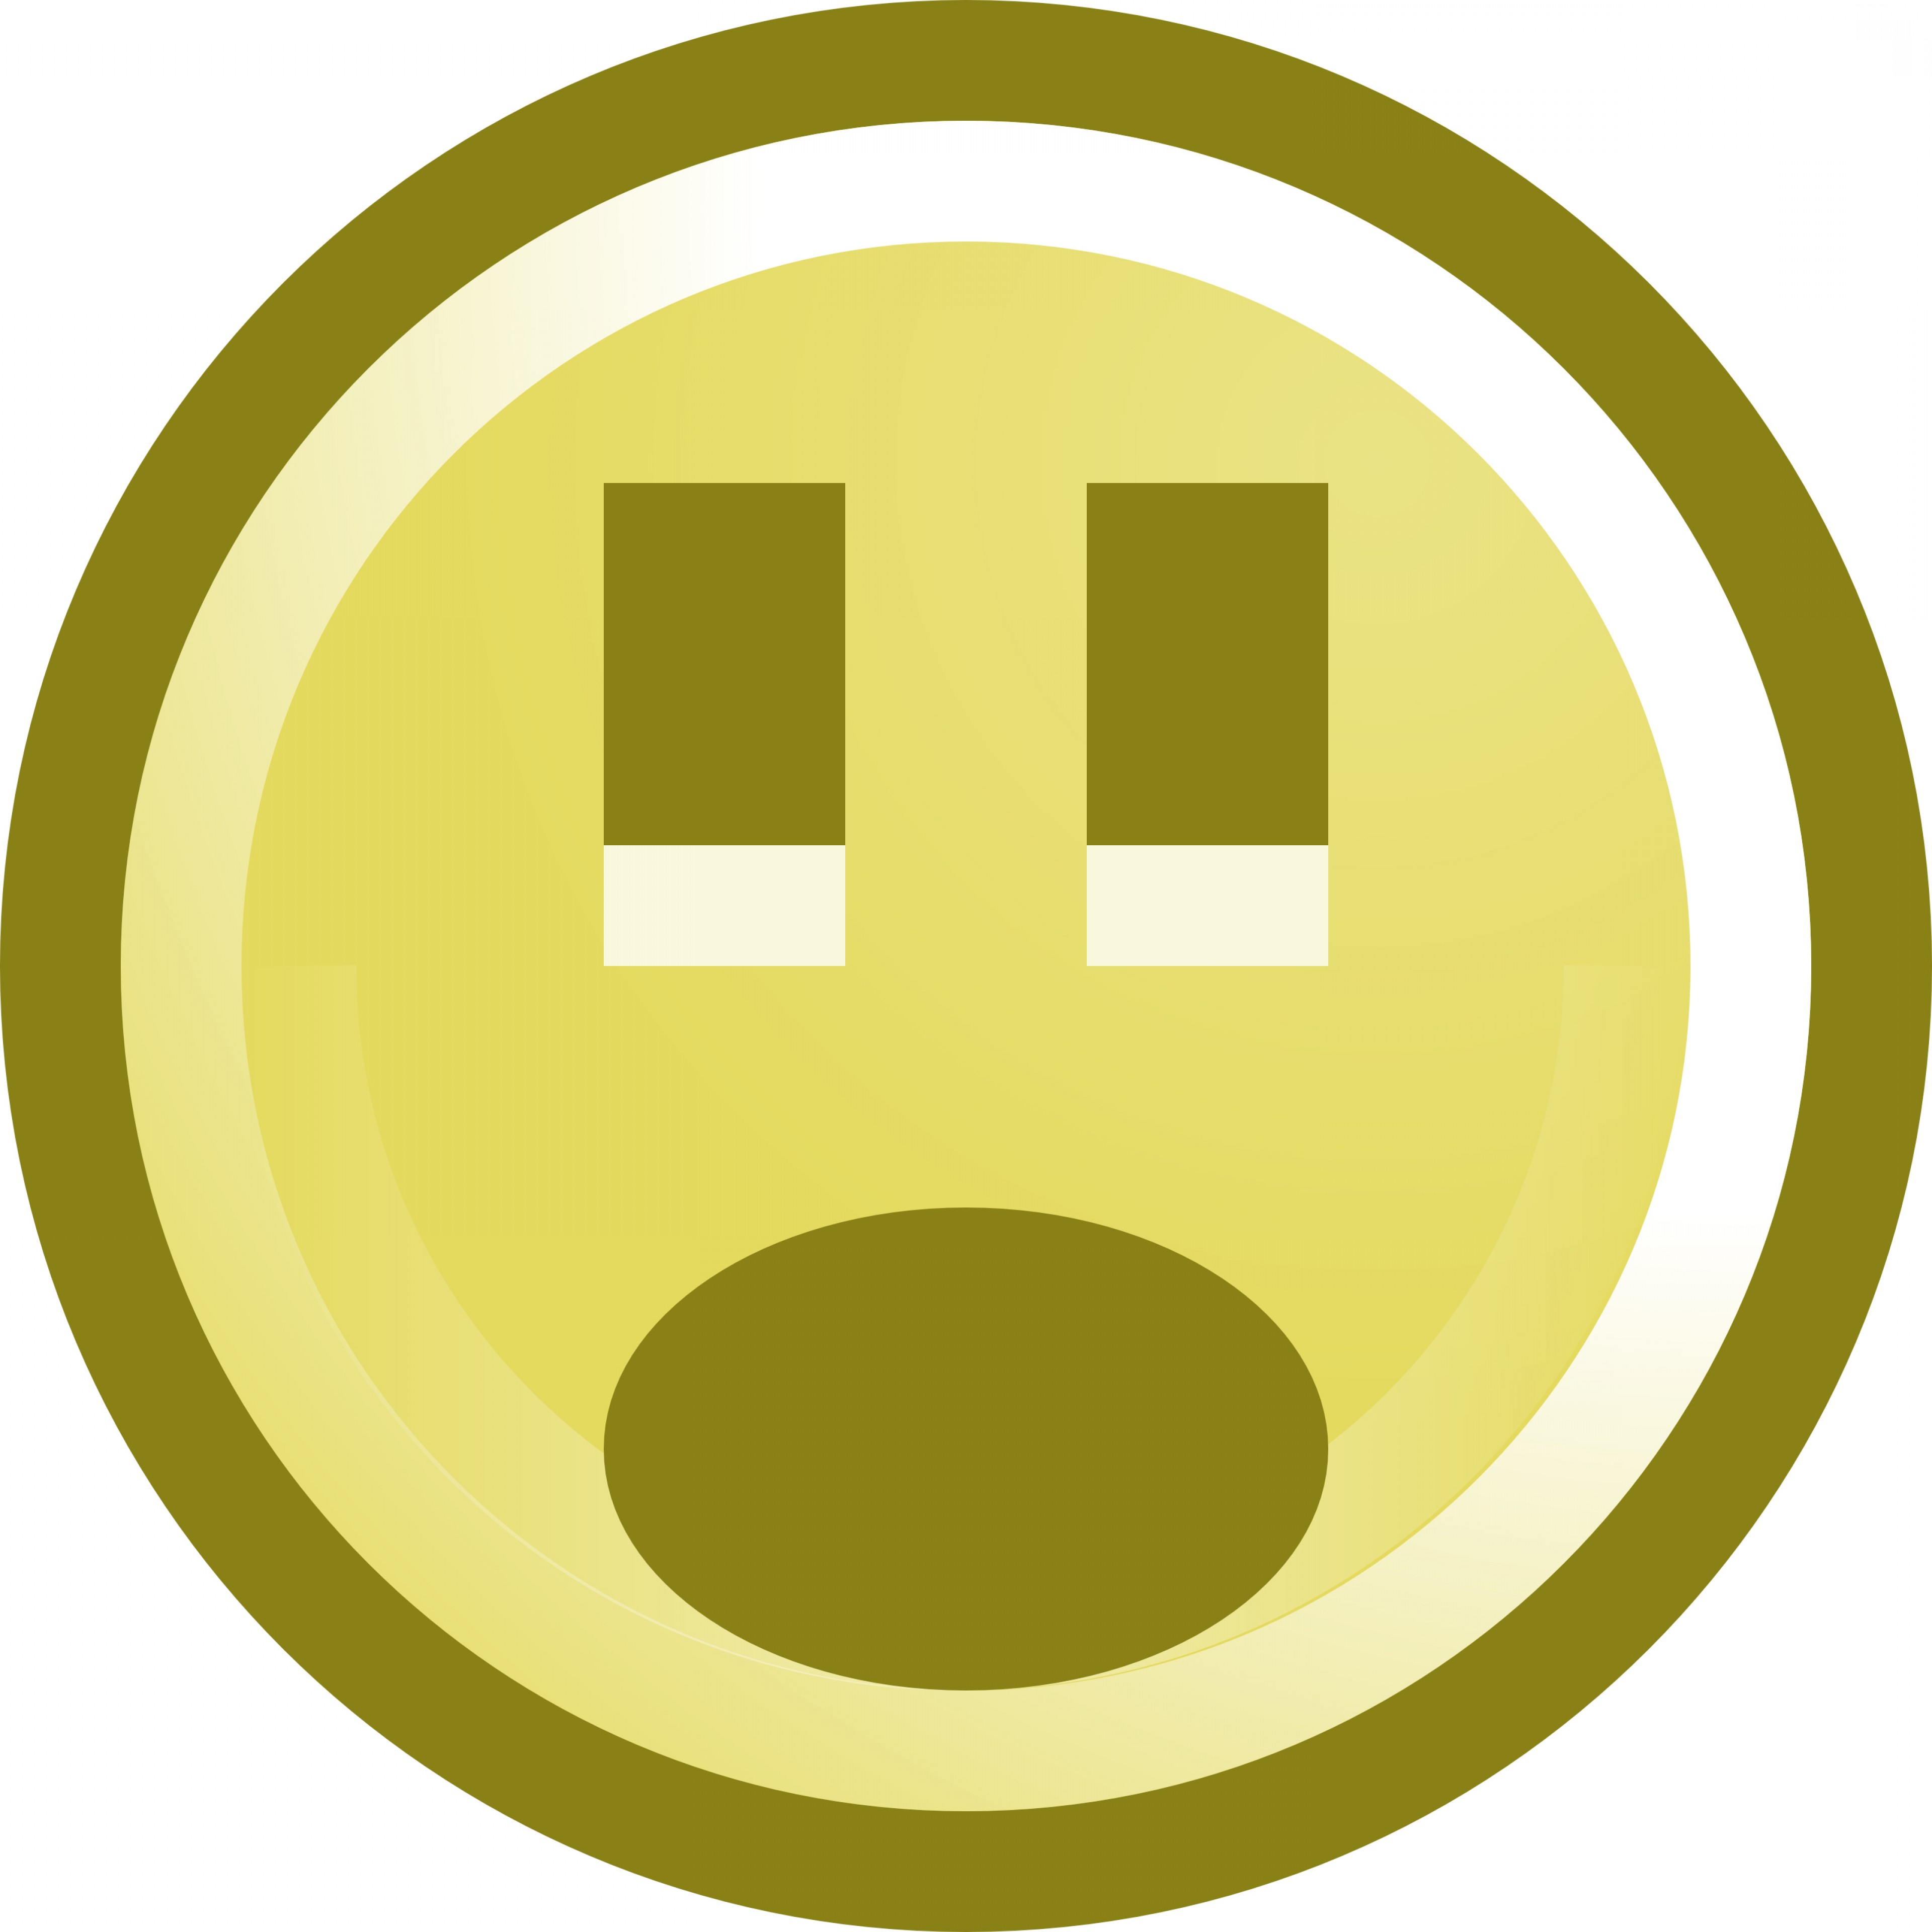 Exclusive Free Shocked Smiley Face Clip Art Illustration Draw ...